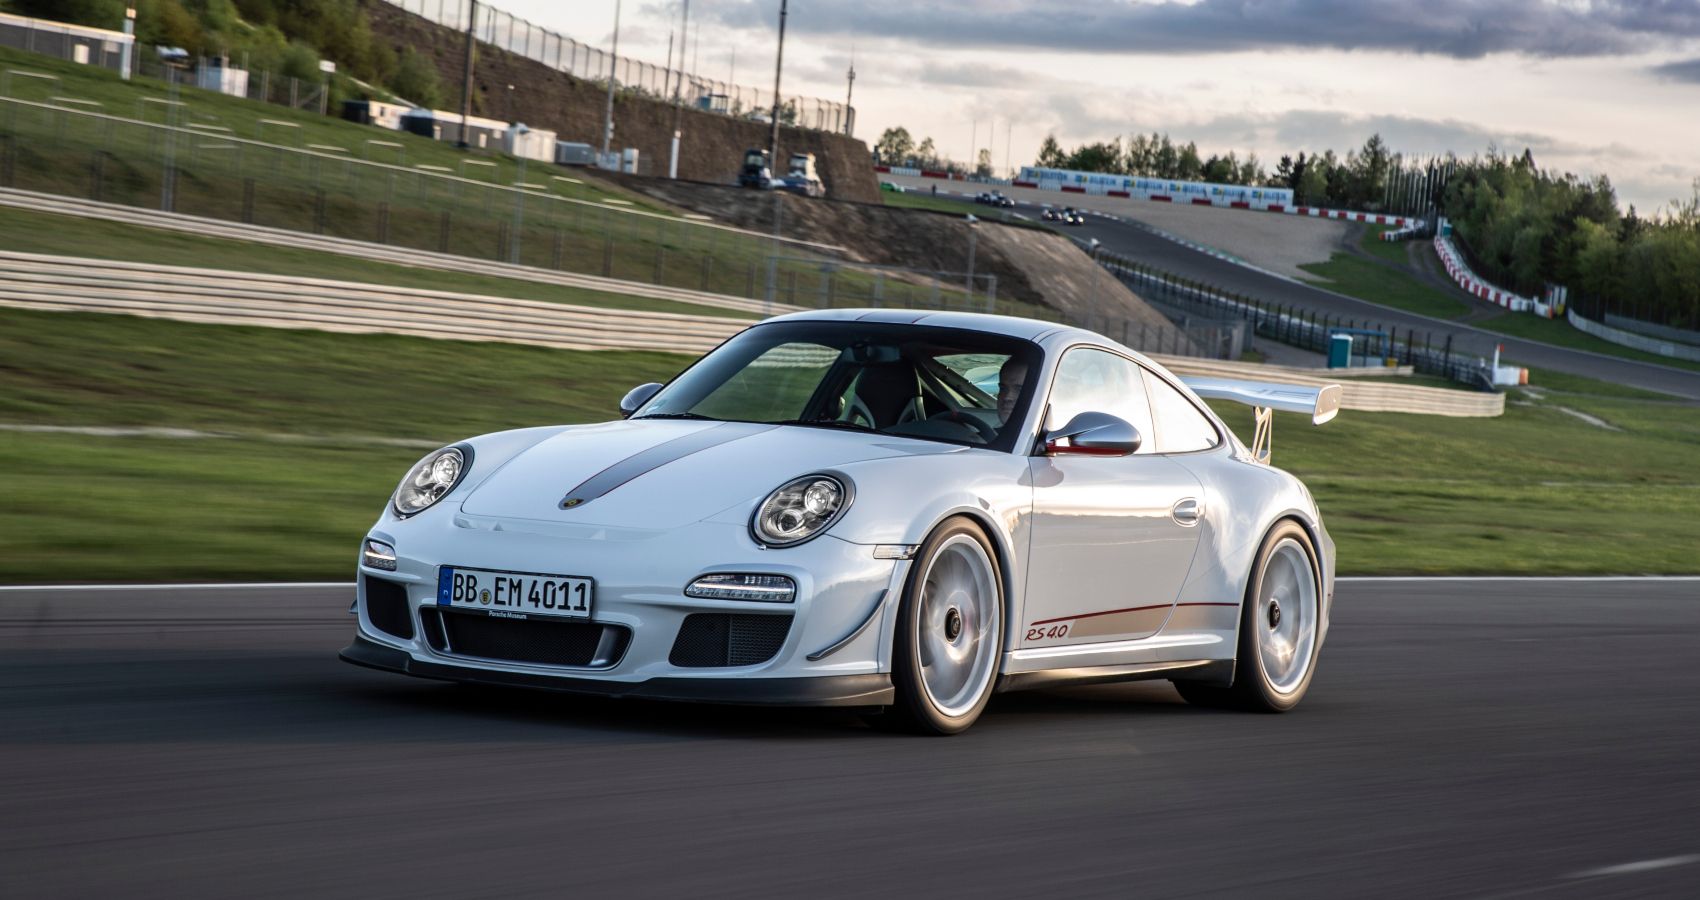 Porsche 911 GT3 RS 4.0 Sports Car On Track